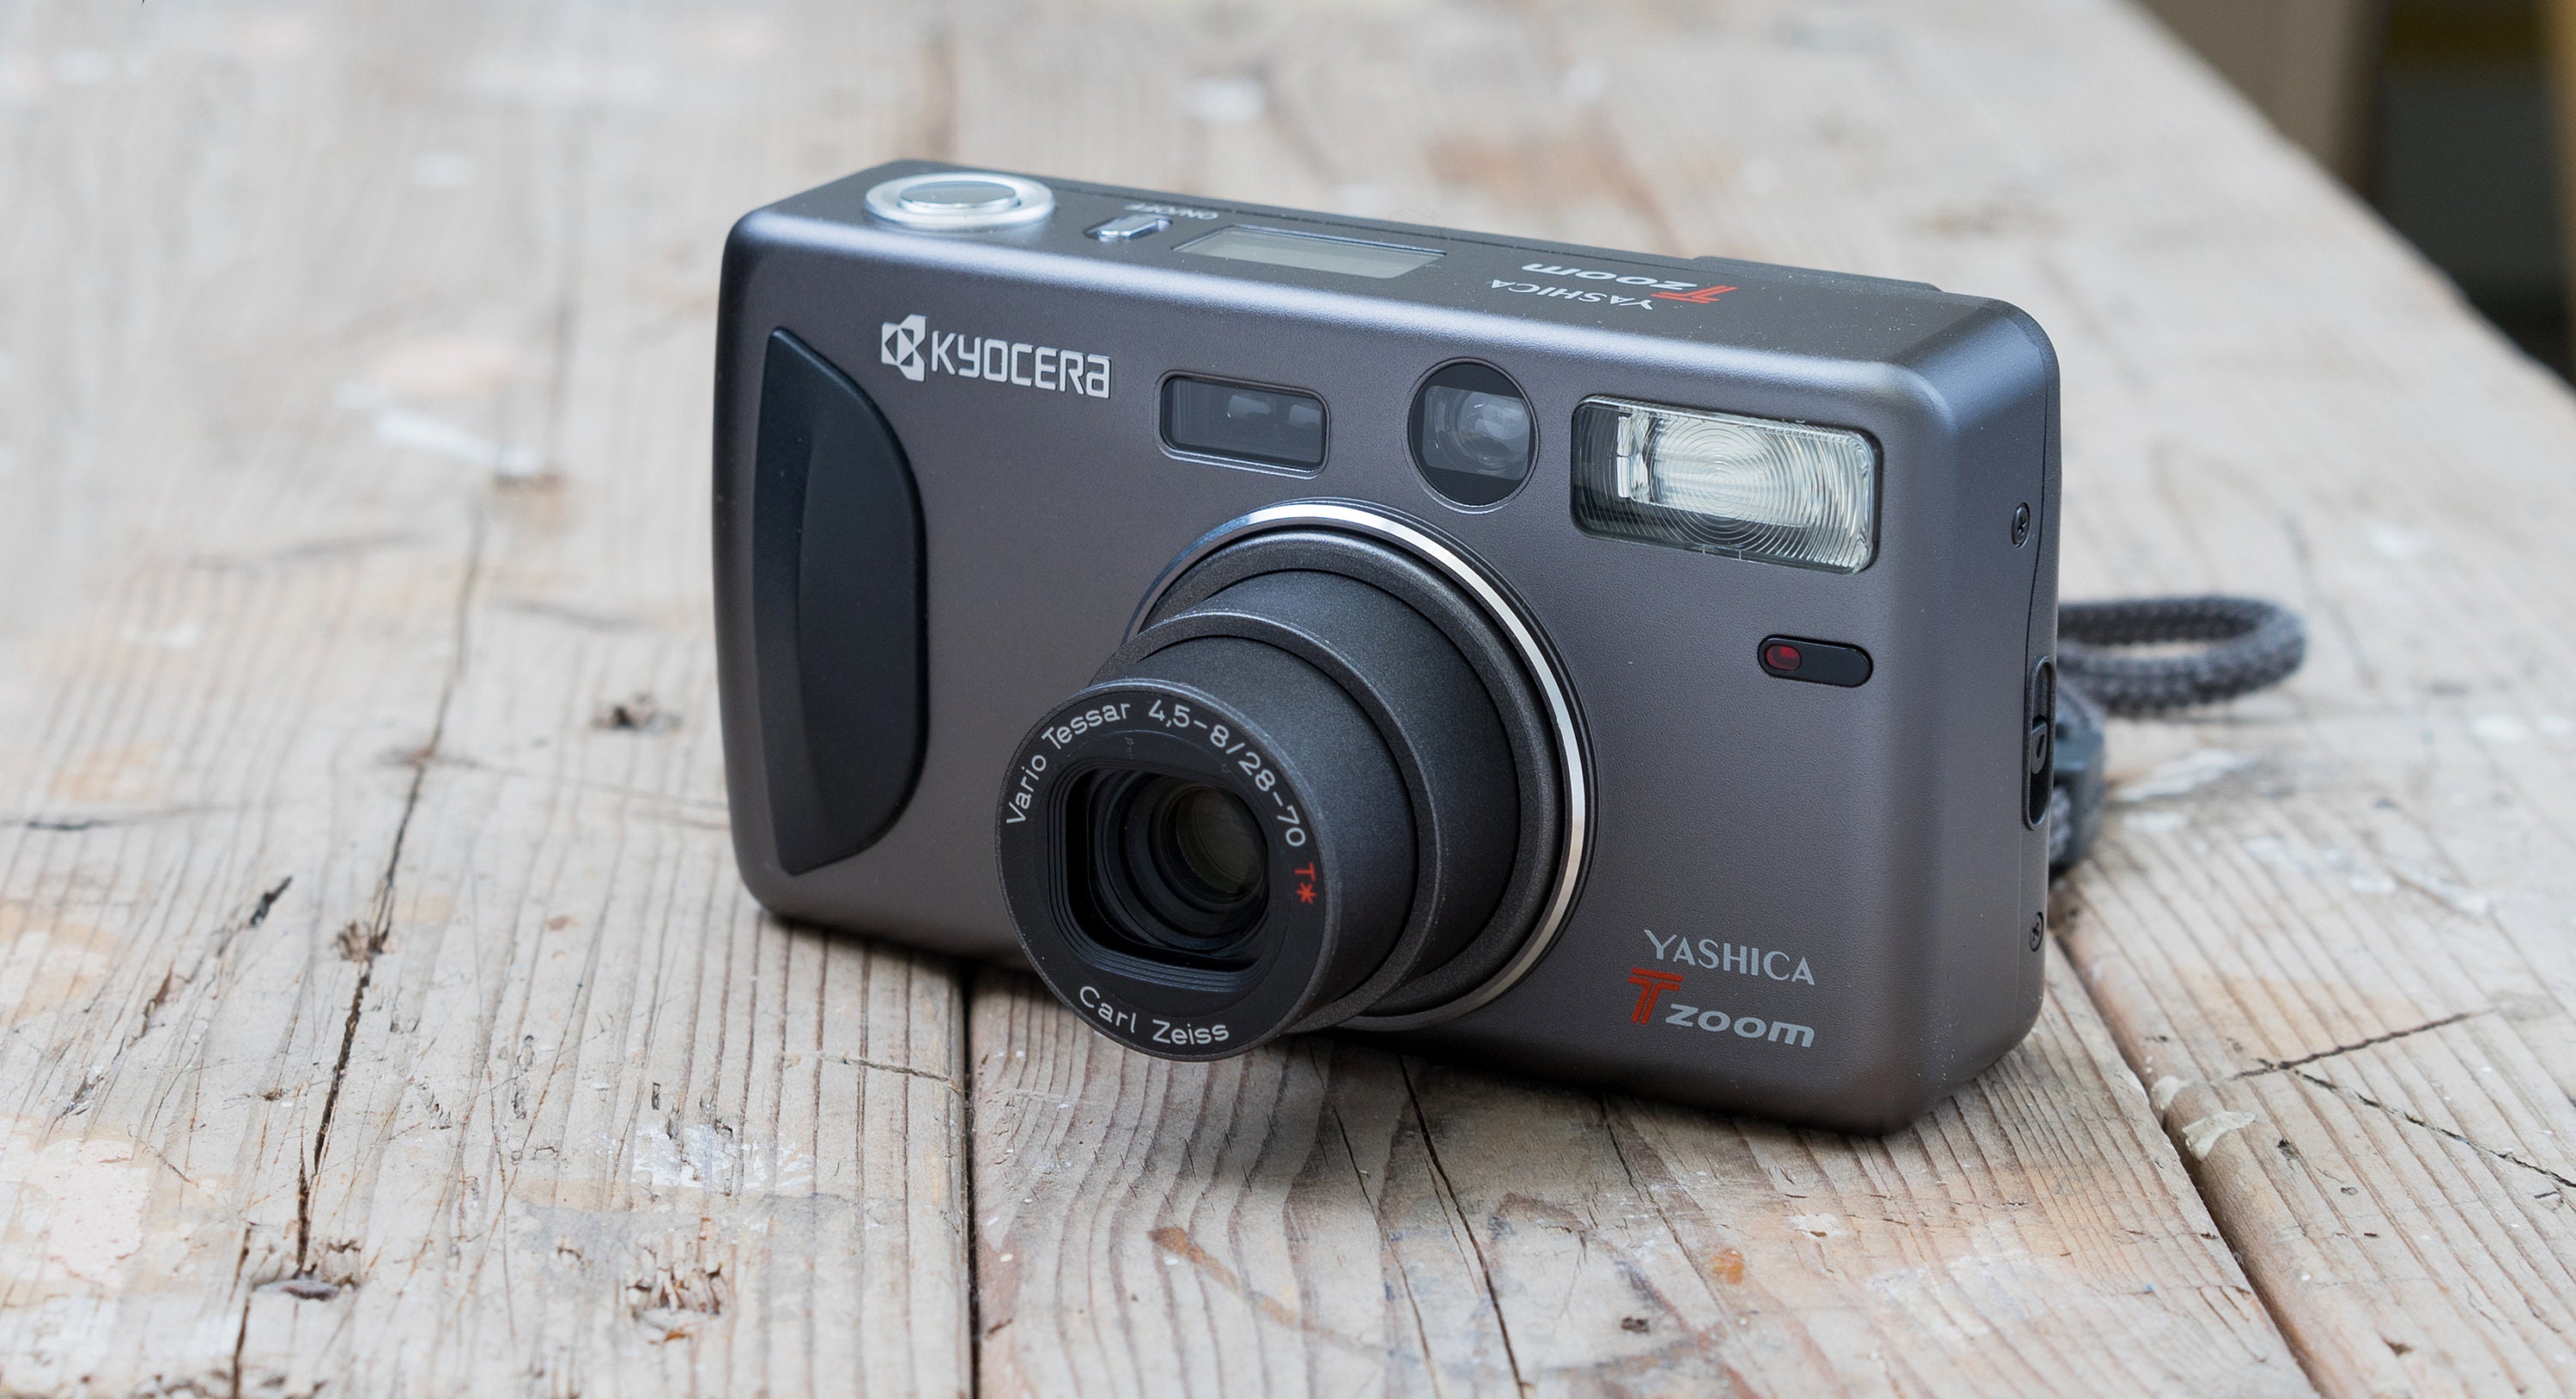 Yashica T Zoom / Kyocera T Zoom / Carl Zeiss 28-70mm F4.5-8 - Etsy